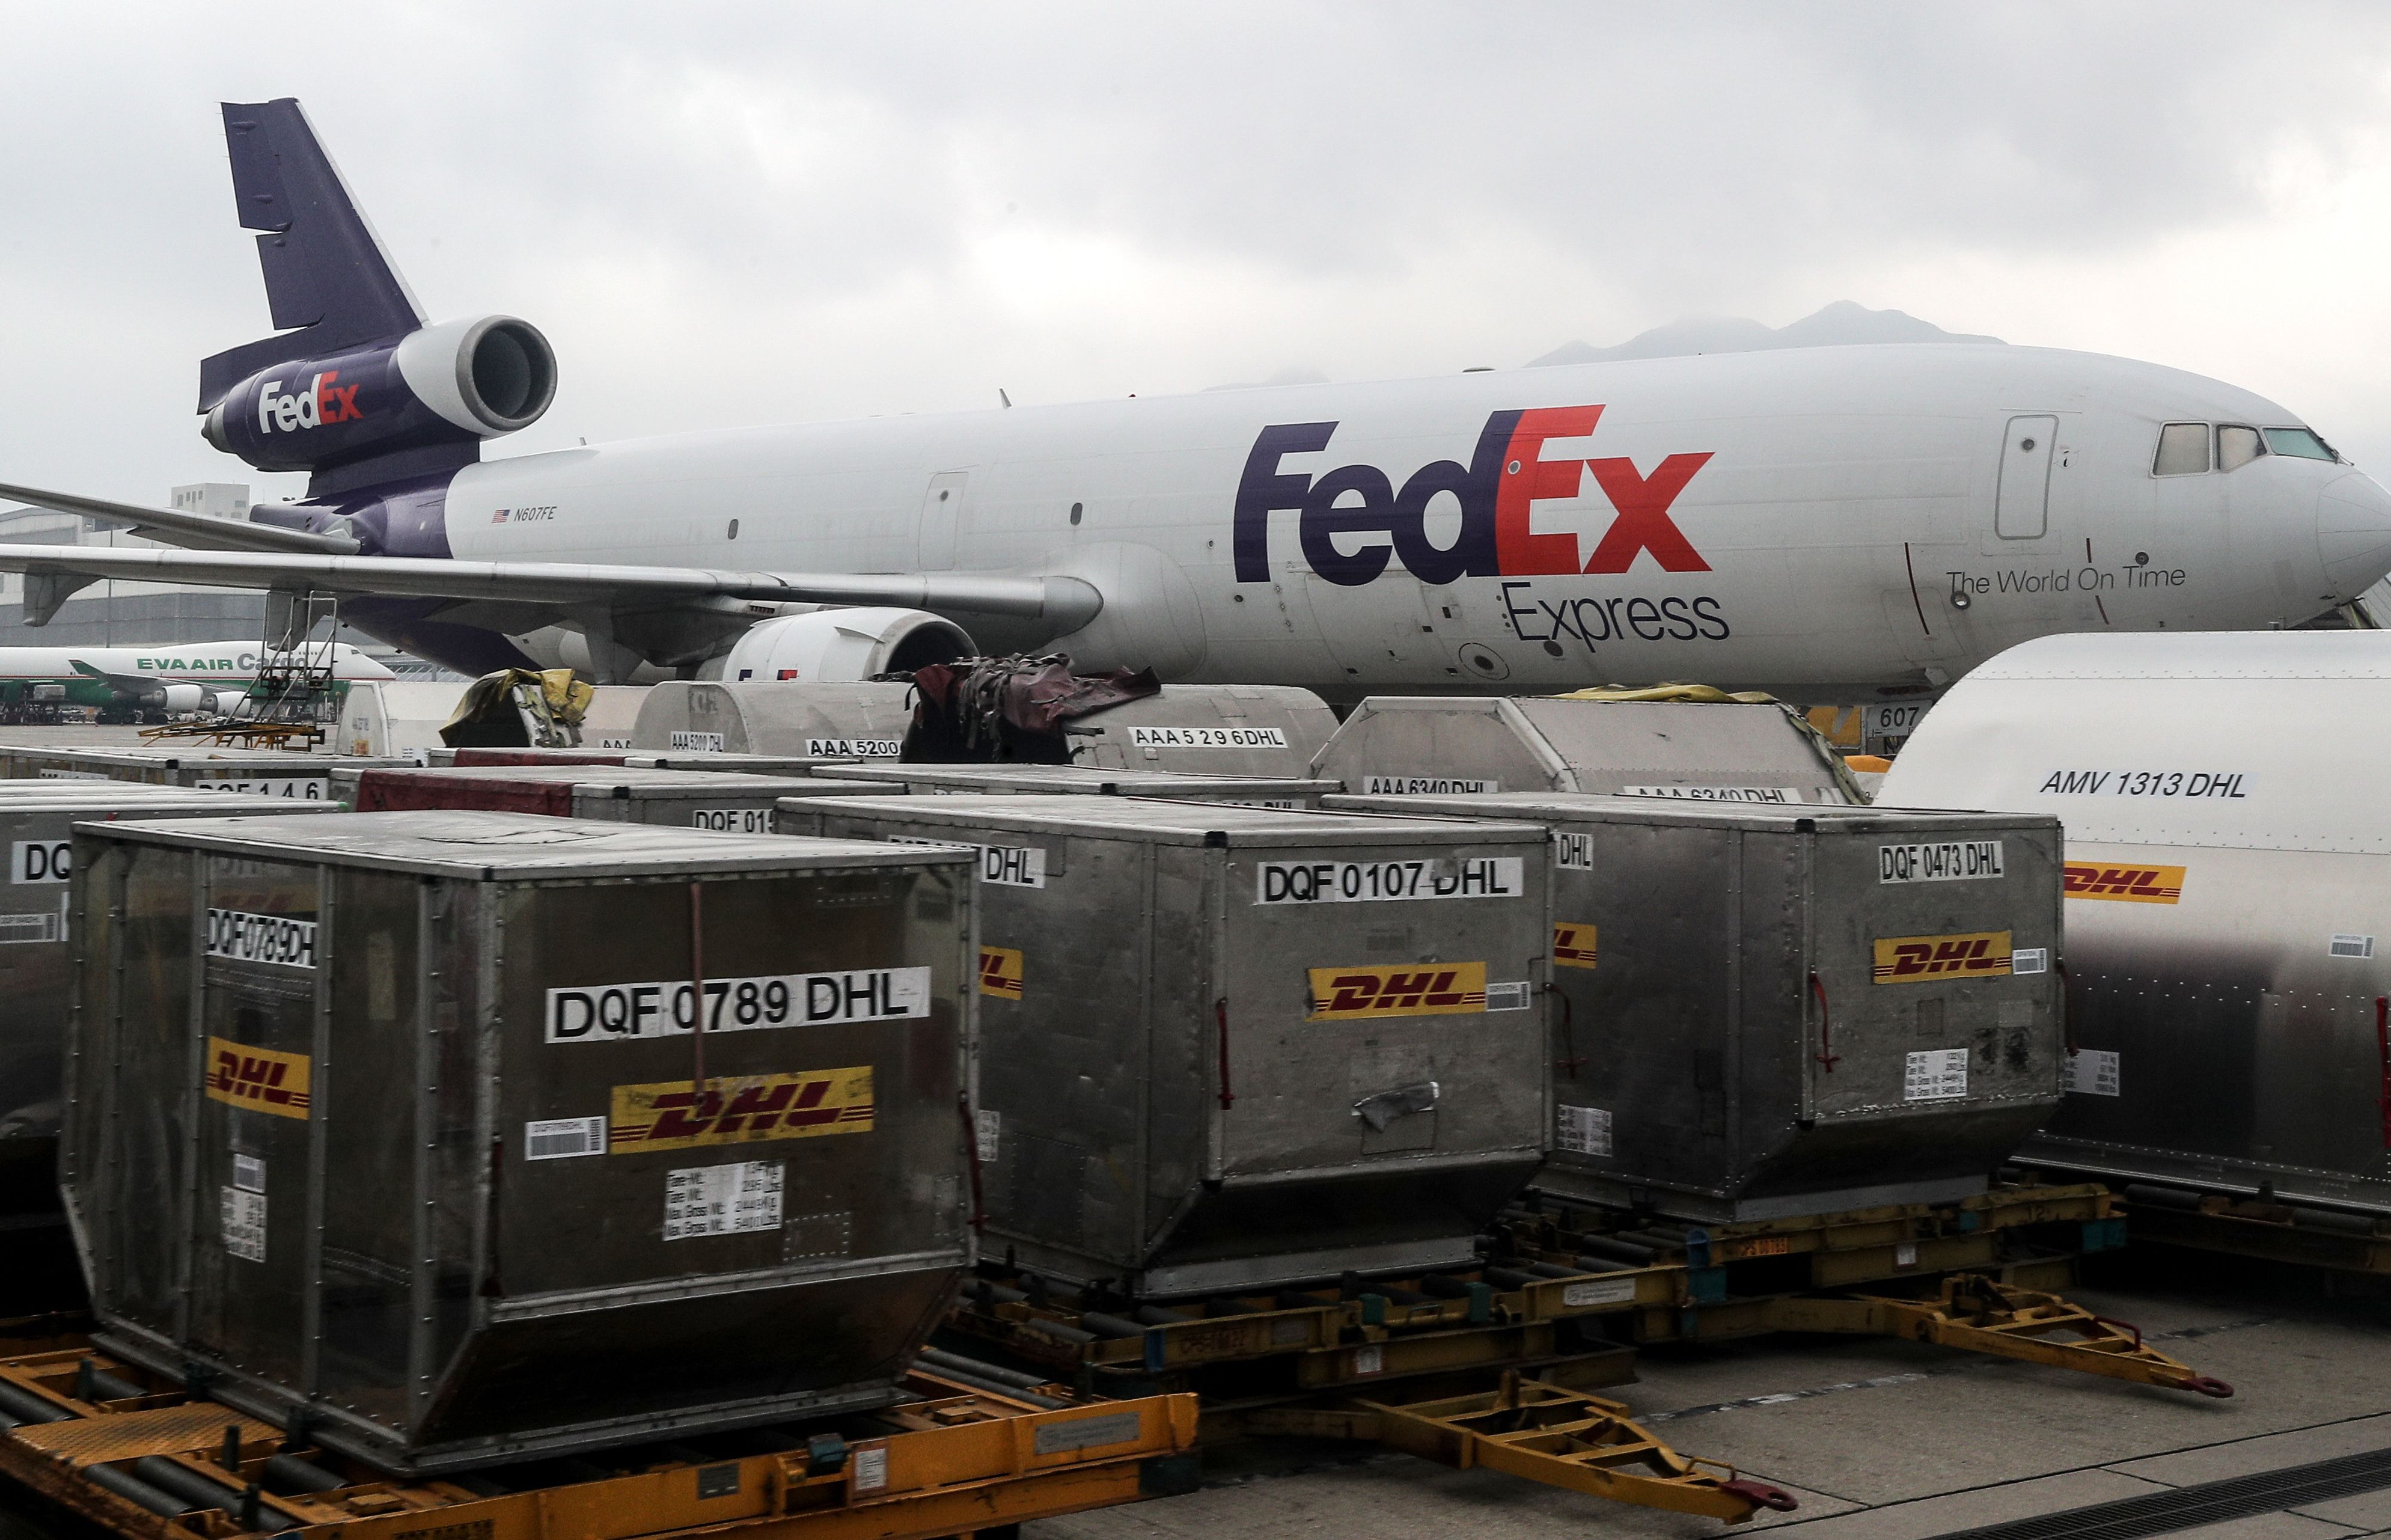 FedEx sues US over screening requirements in Huawei dispute as China tensions rise